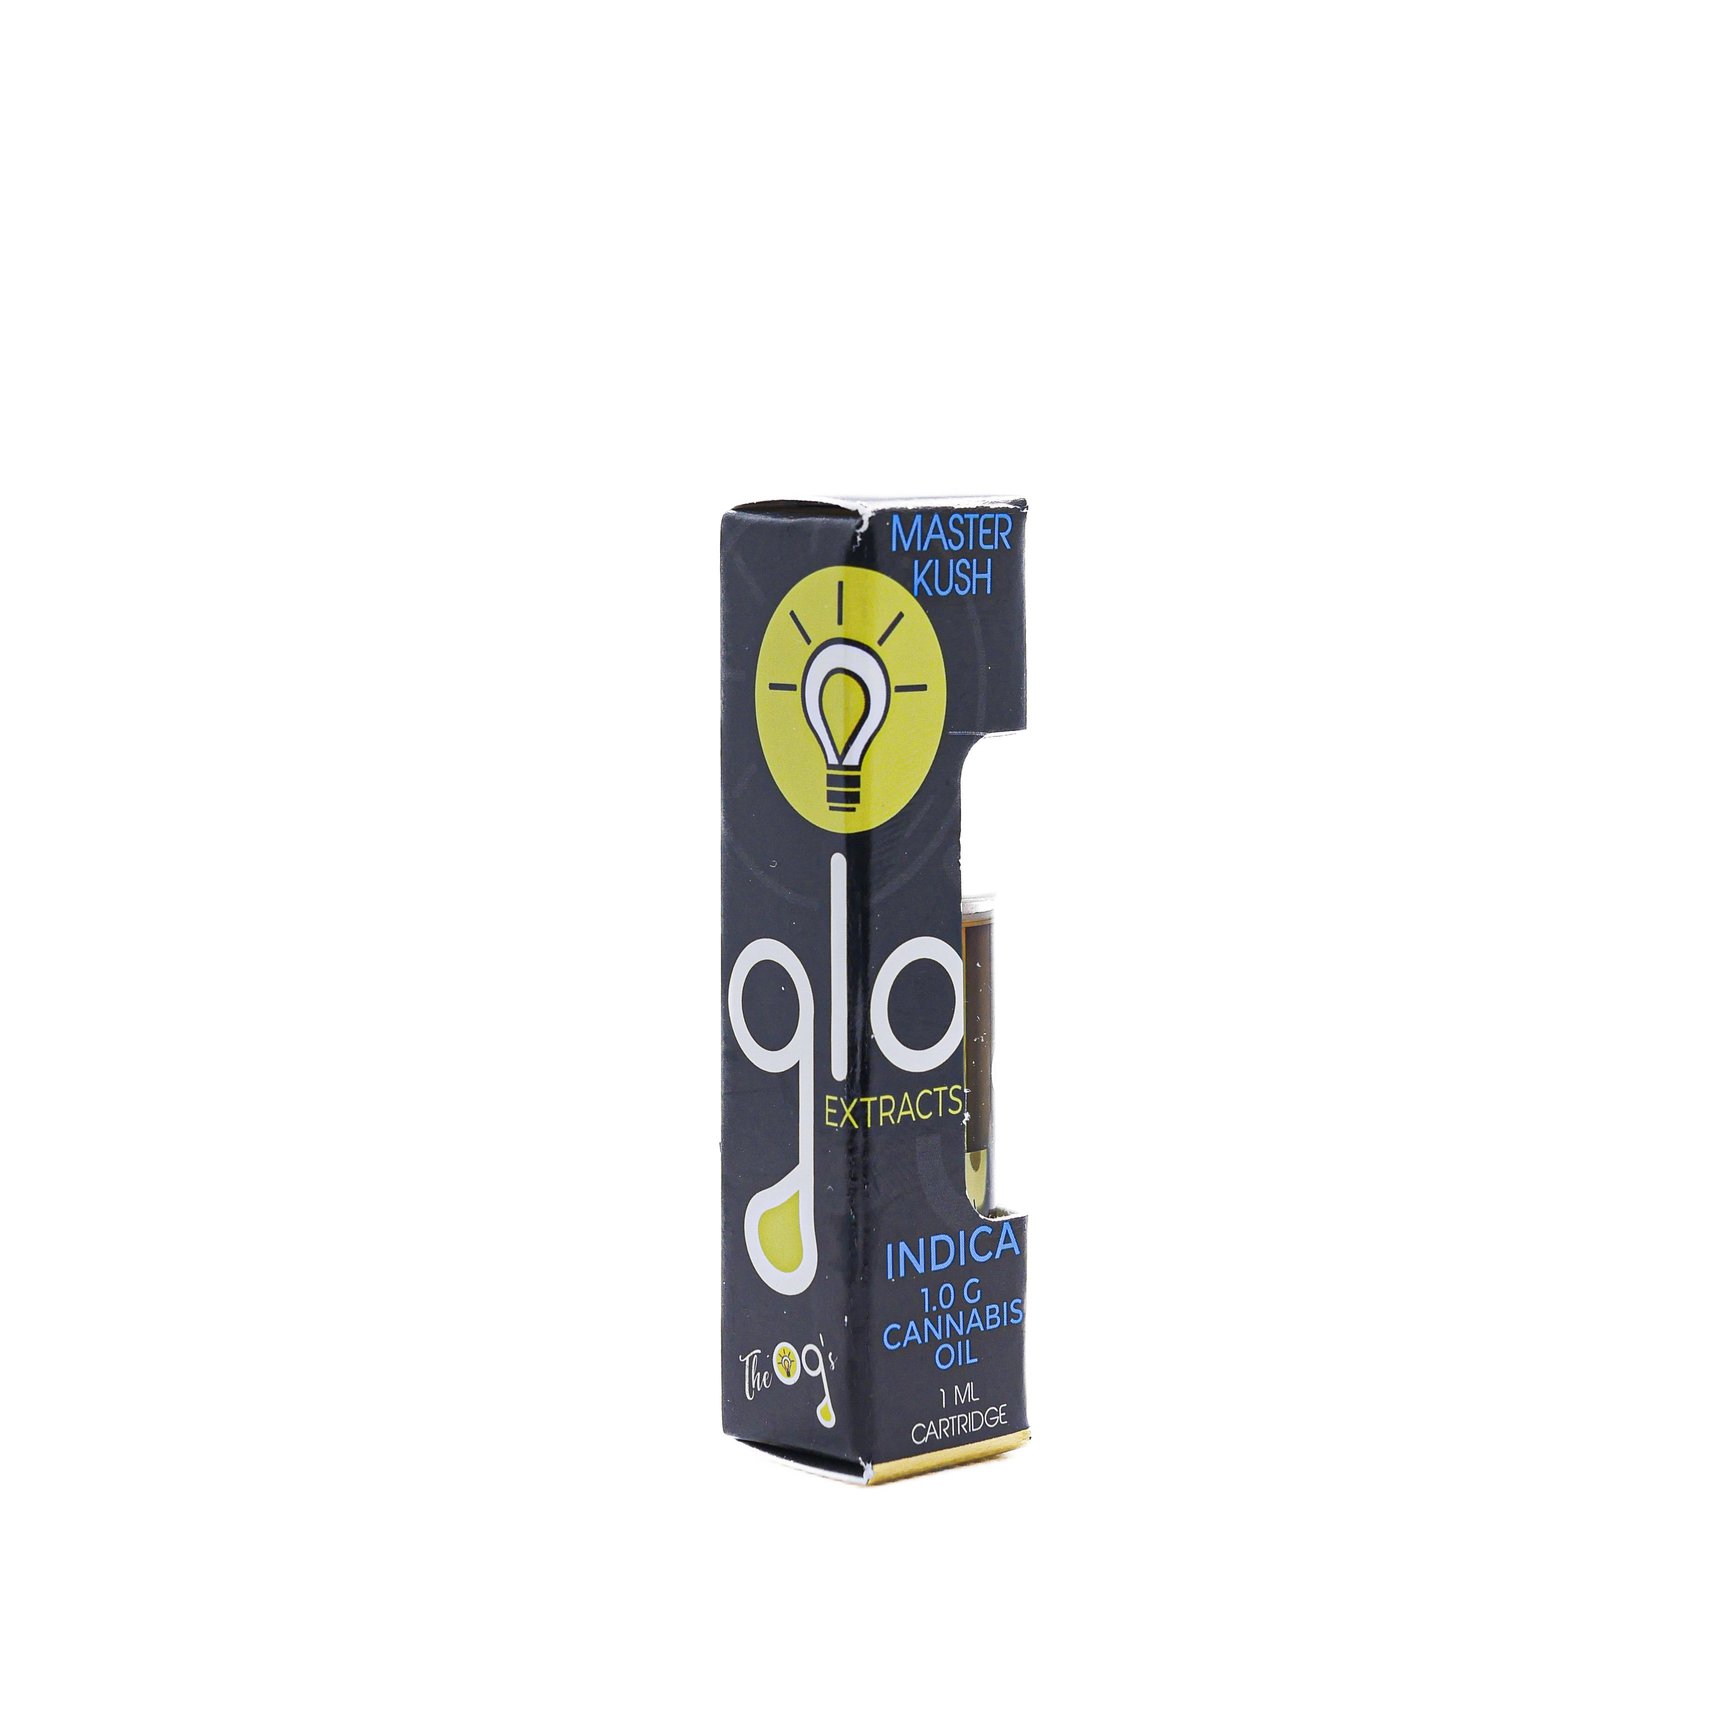 Glo Extracts 1G Cartridge